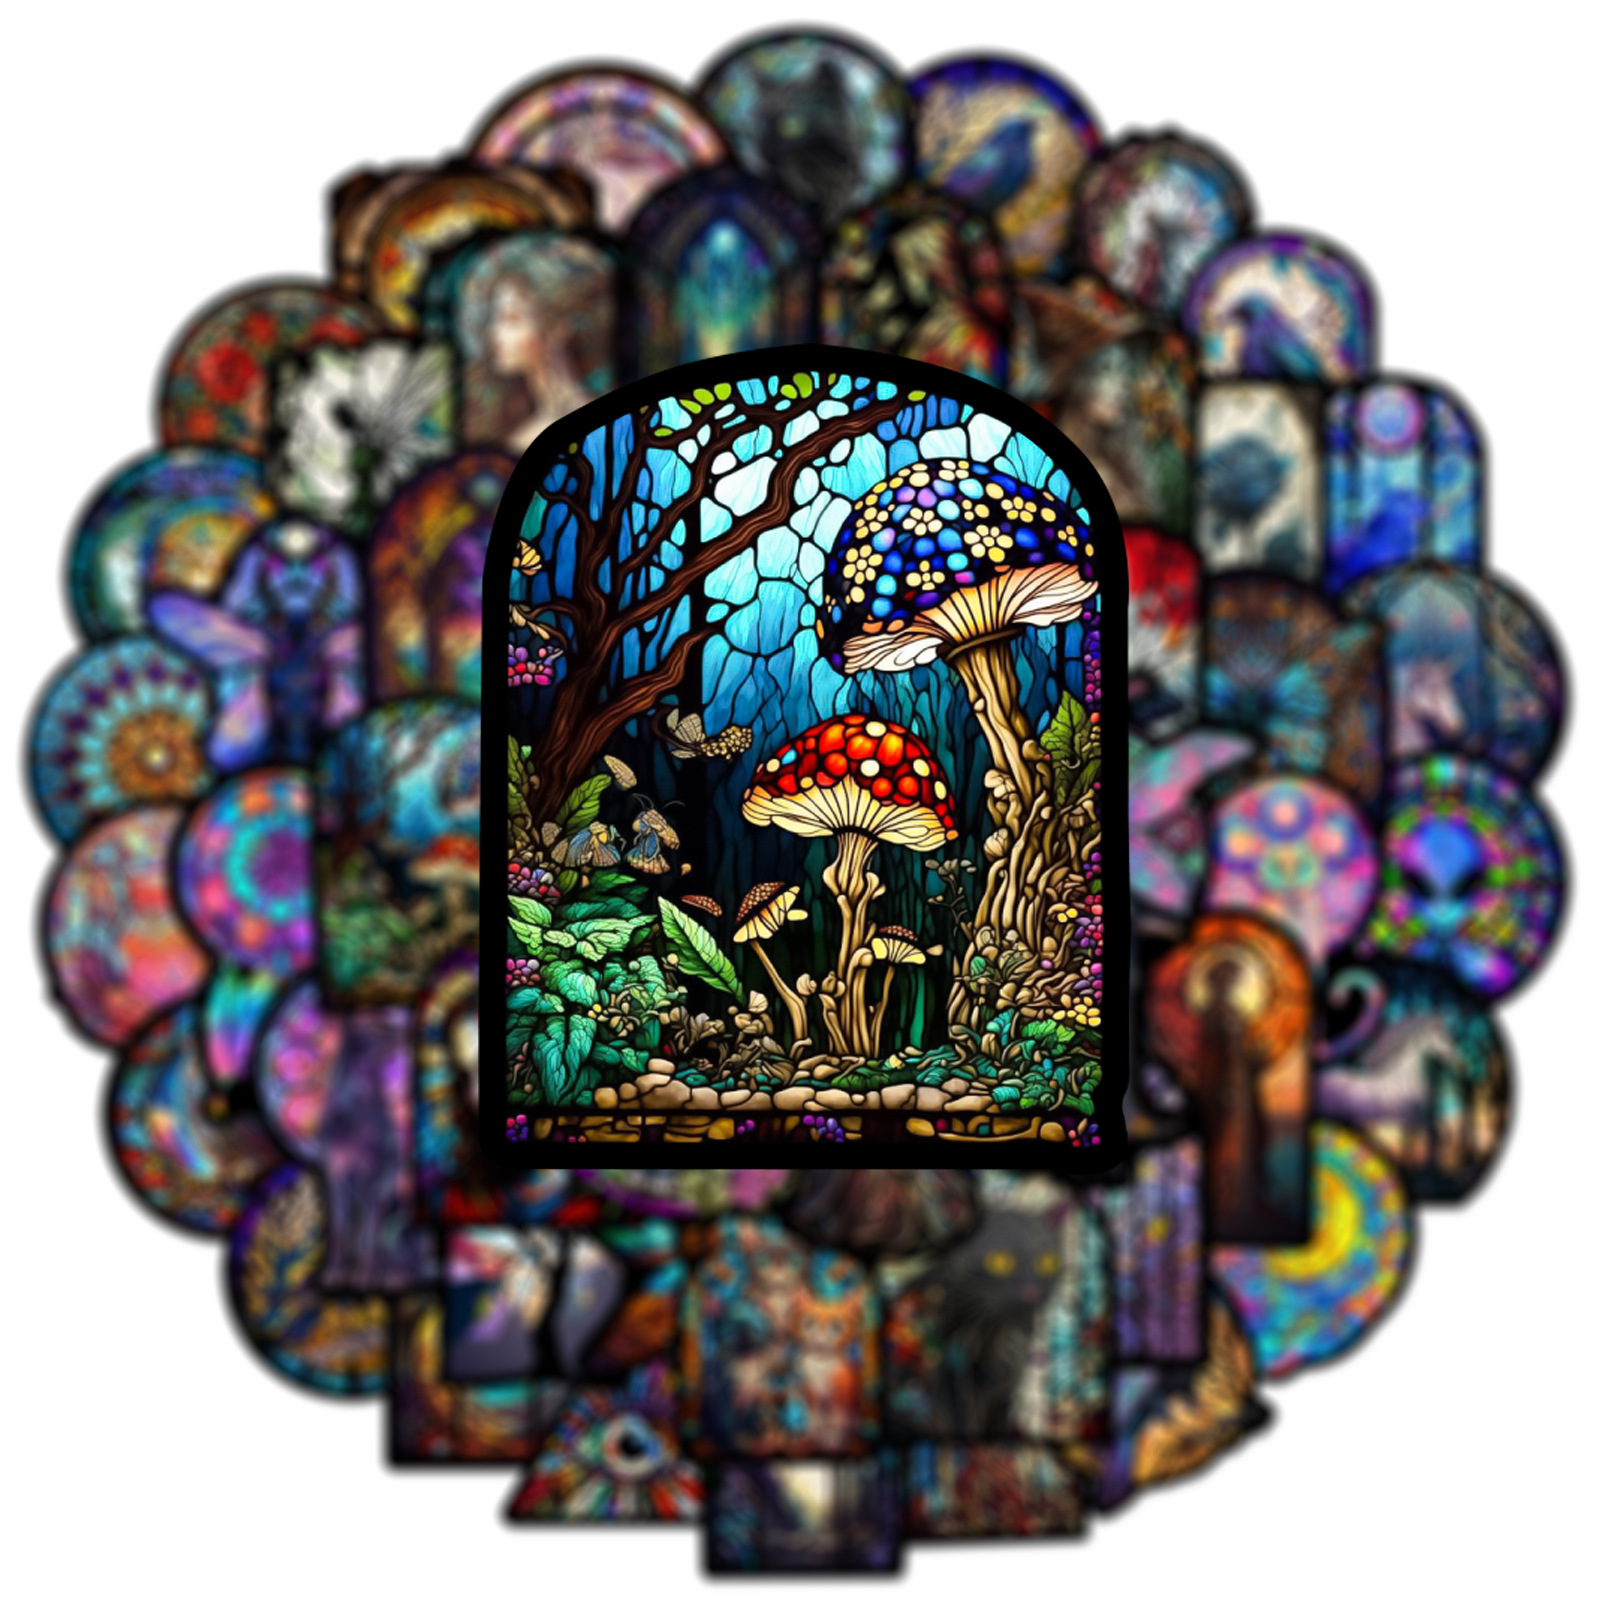 Vintage Gothic Stained Glass Stickers Church Art Glass Graffiti Stickers for DIY Luggage Laptop Motorcycle Bicycle Stickers